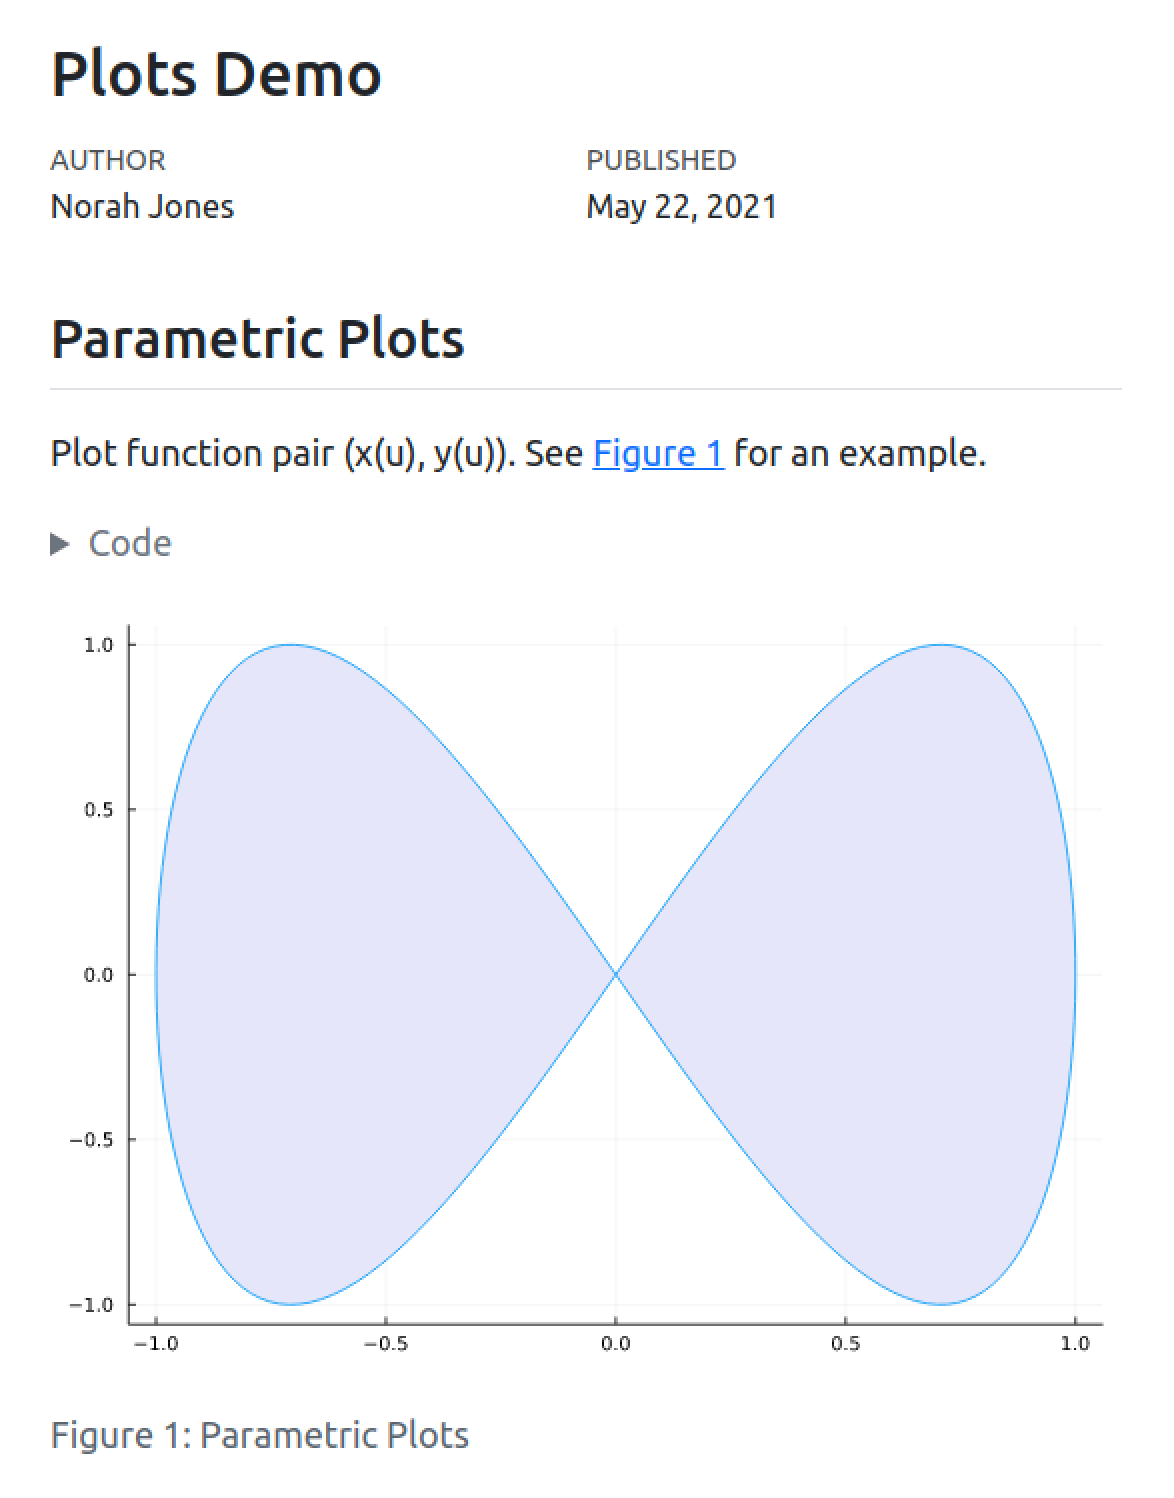 Example Plots Demo output with title, author, date published and main section on Parametric plots which contains text, a toggleable code field, and the output of the plot, with the caption Figure 1 Parametric Plots.